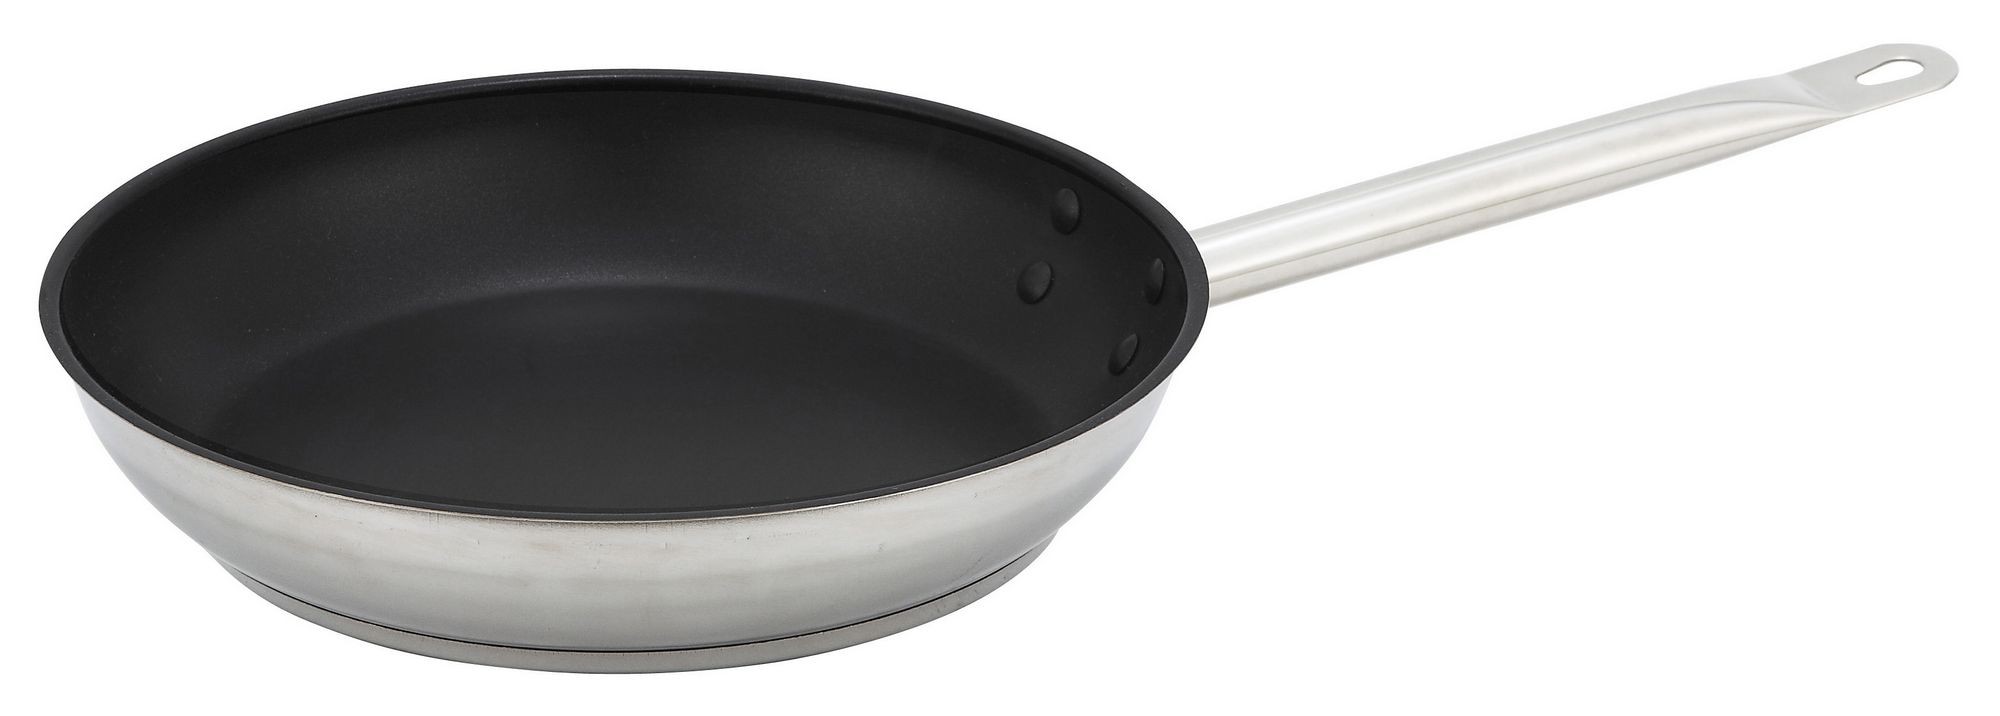 Winco SSFP-8NS Non-Stick Stainless Steel Induction Fry Pan 8"